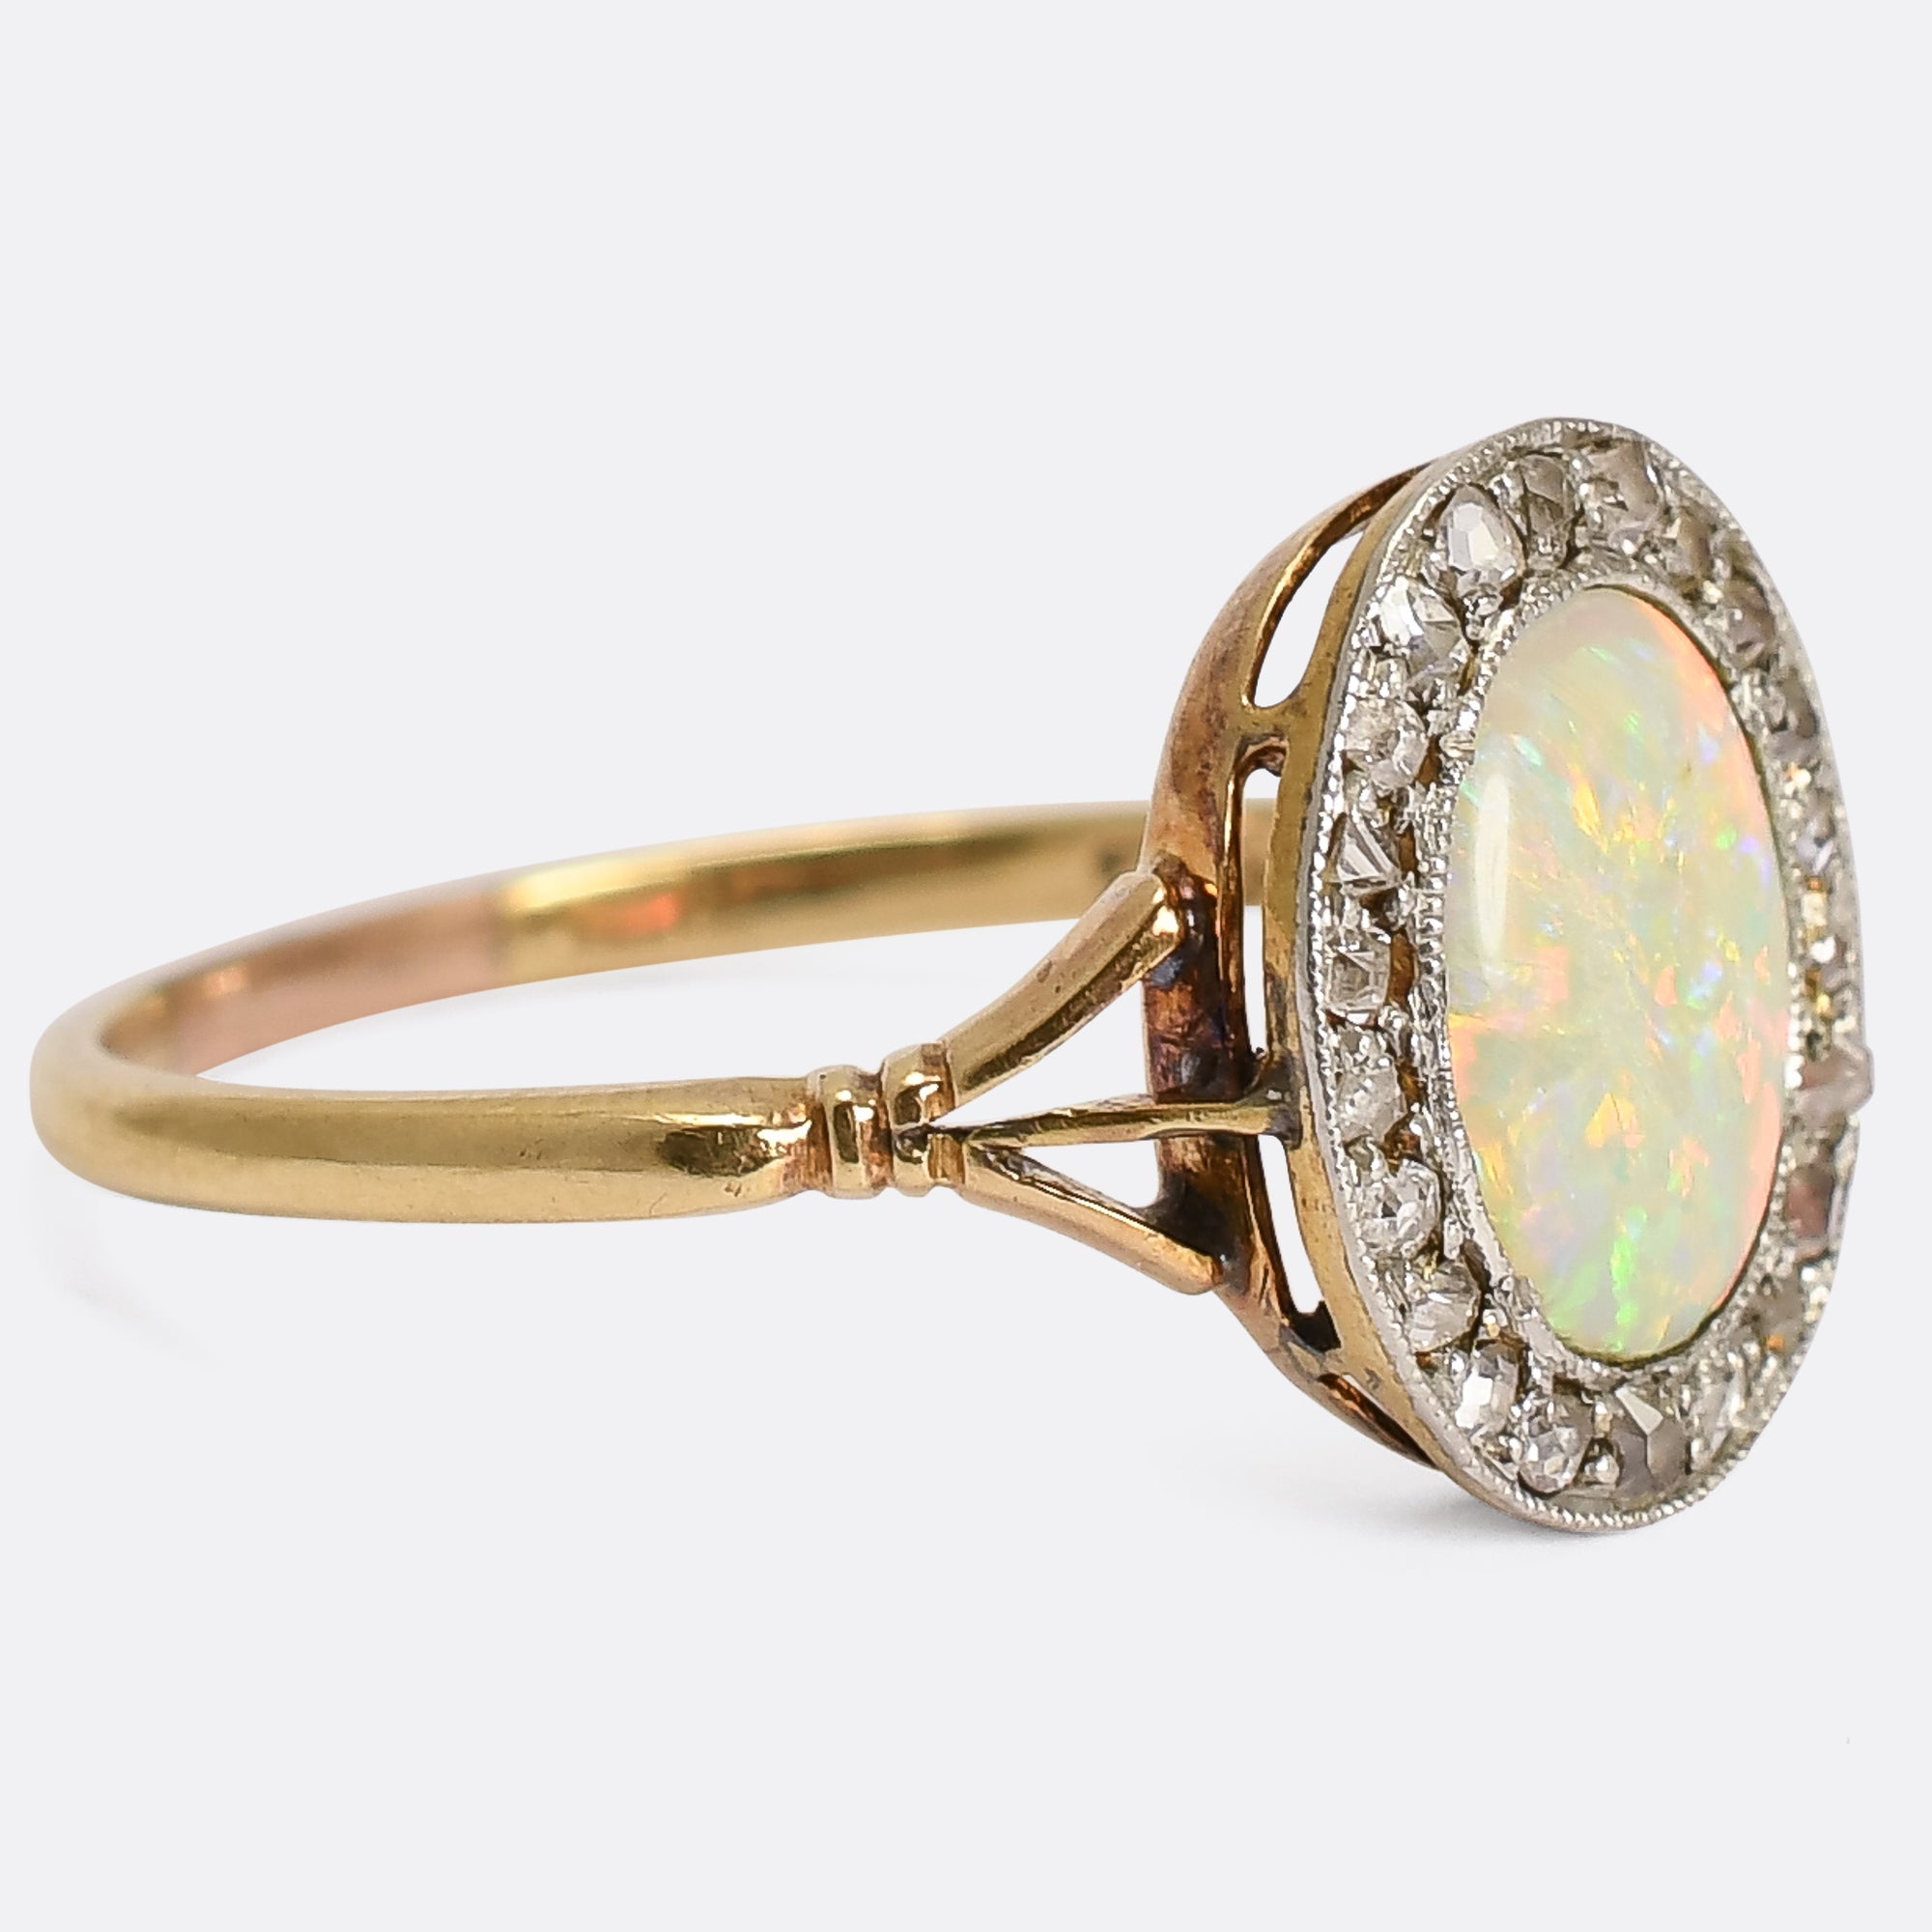 Classic Princess Diana Style Opal & Diamond Halo Ring | Exquisite Jewelry  for Every Occasion | FWCJ